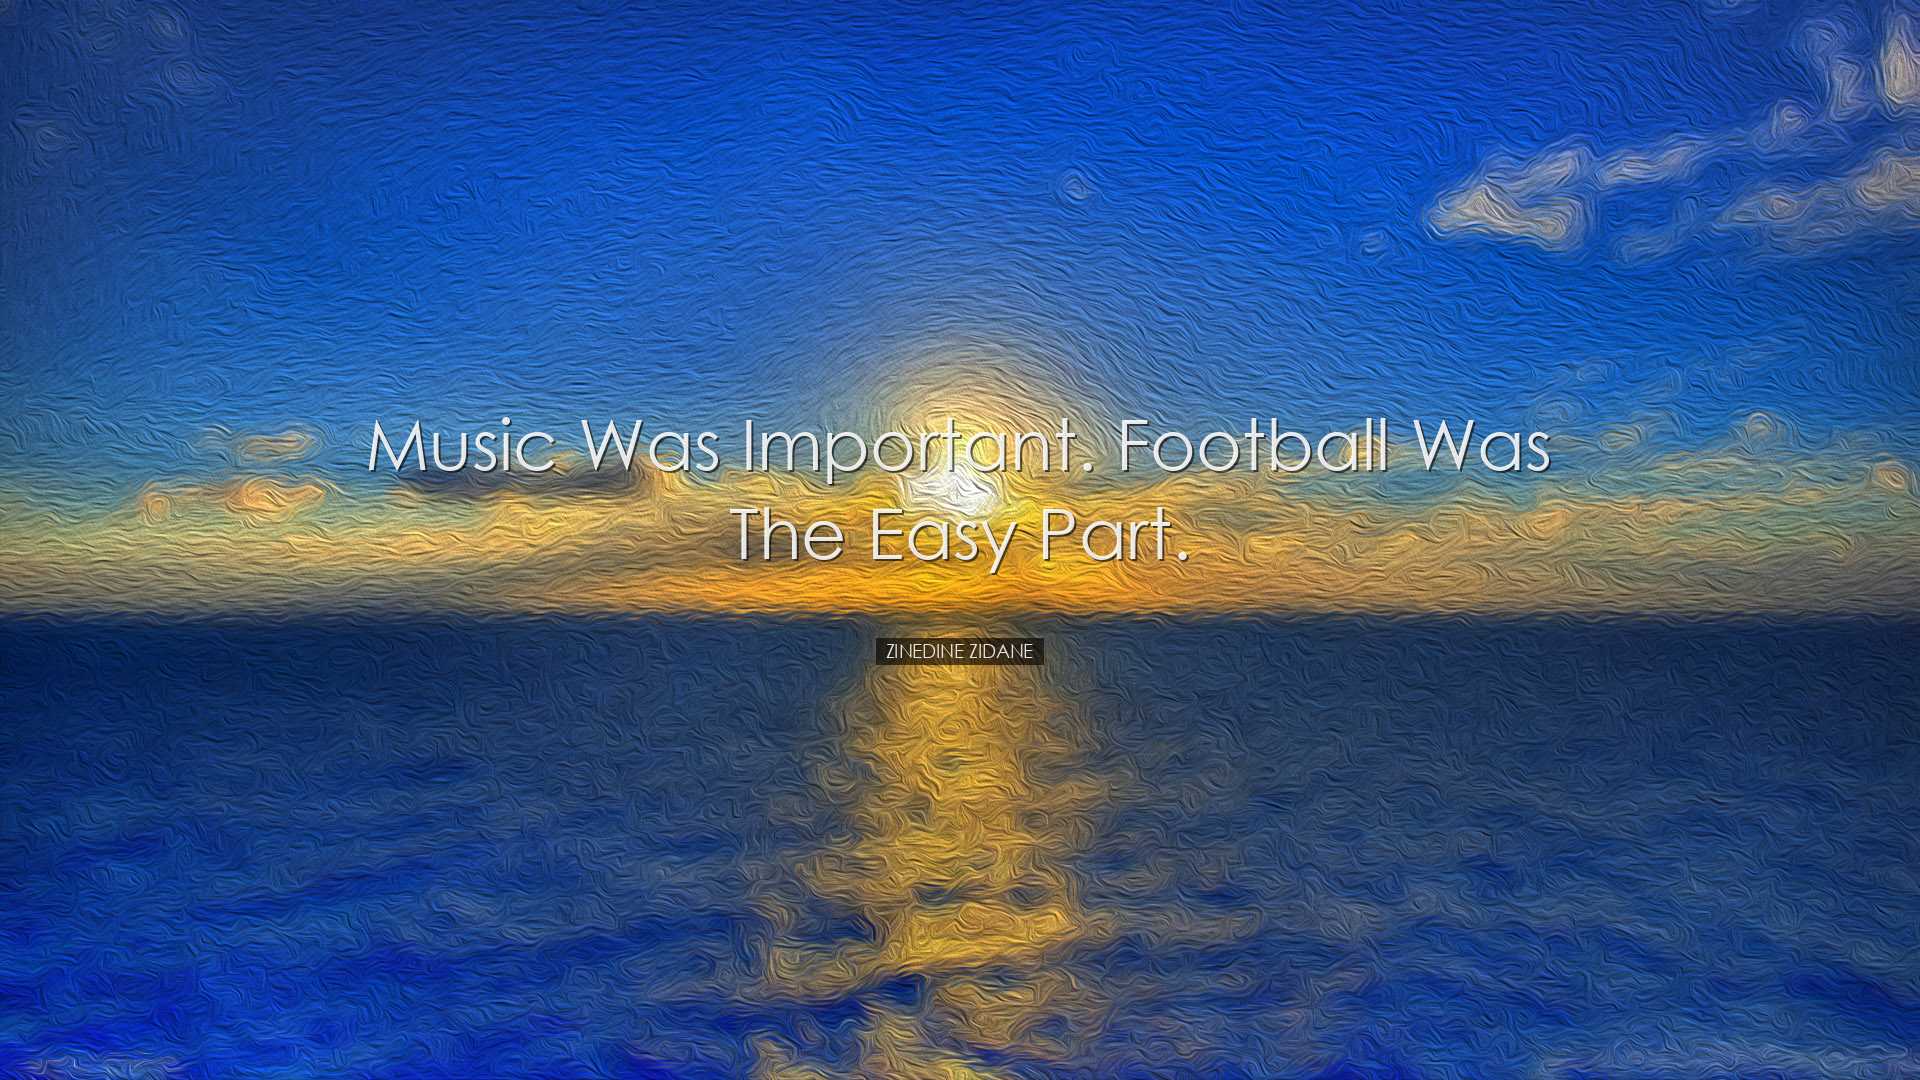 Music was important. Football was the easy part. - Zinedine Zidane